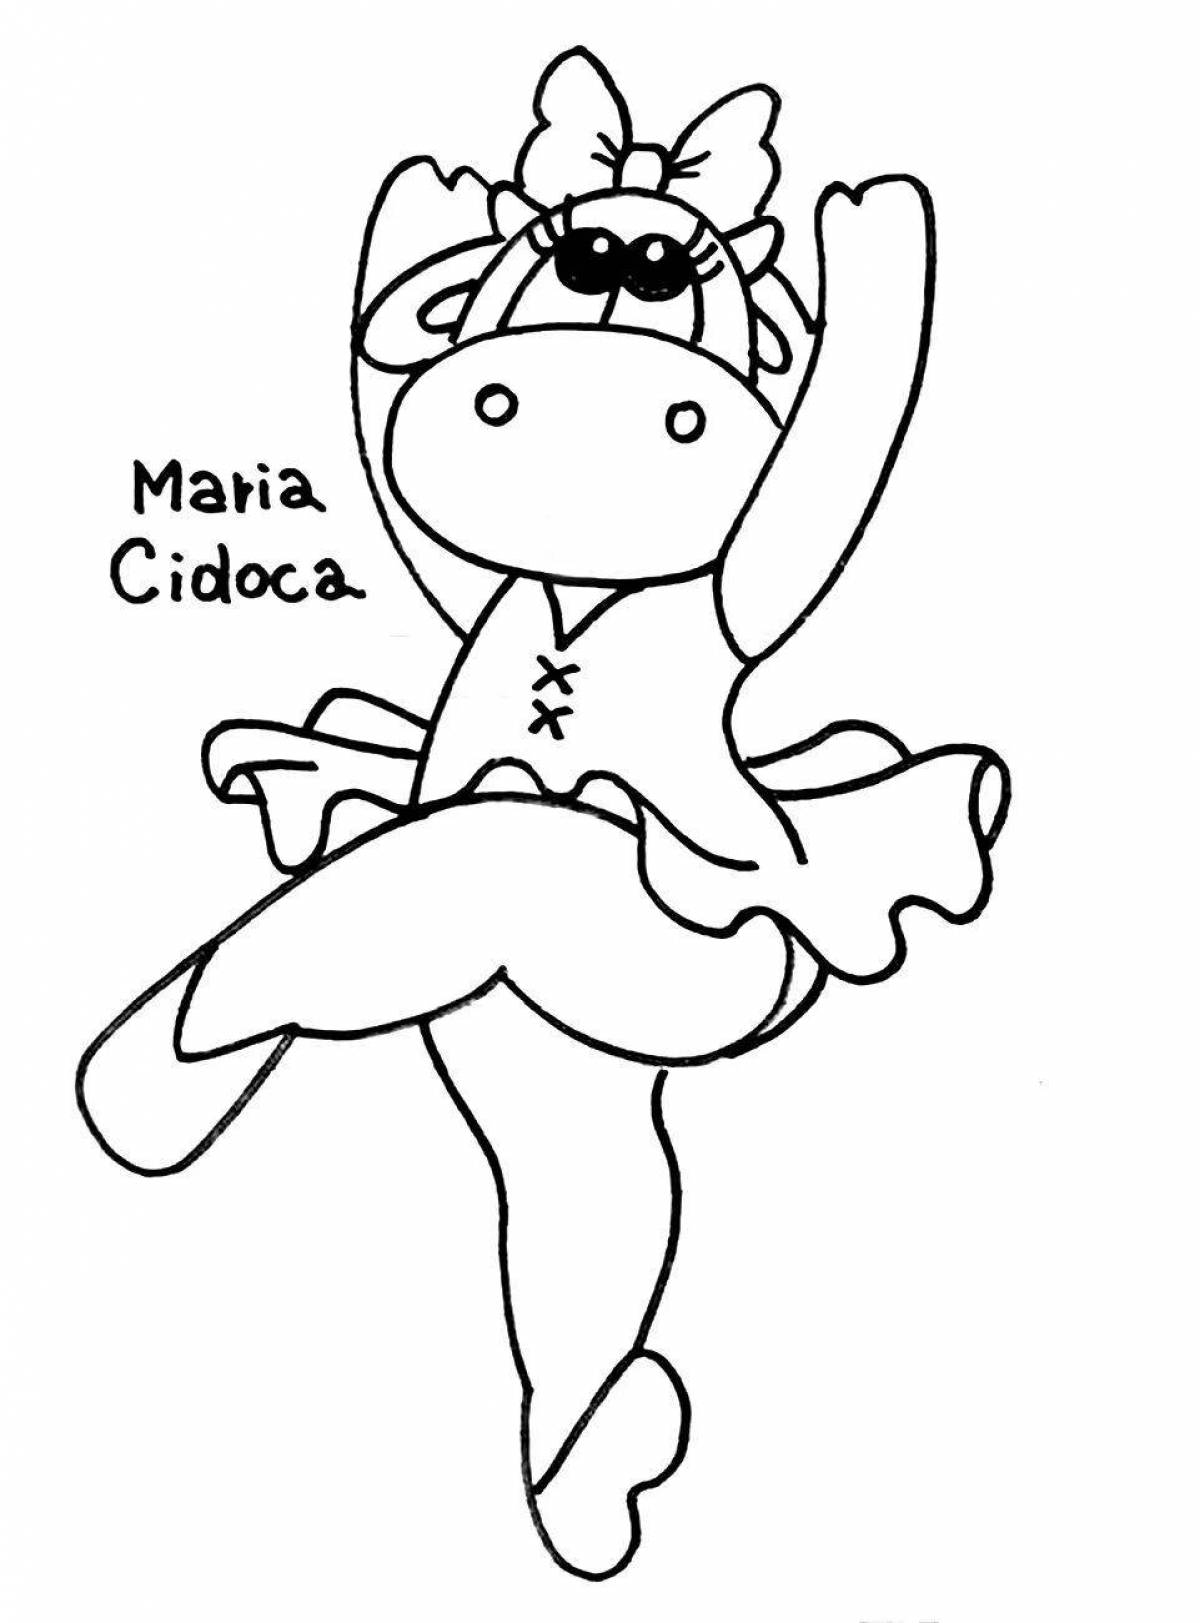 Coloring page adorable ballerina cat